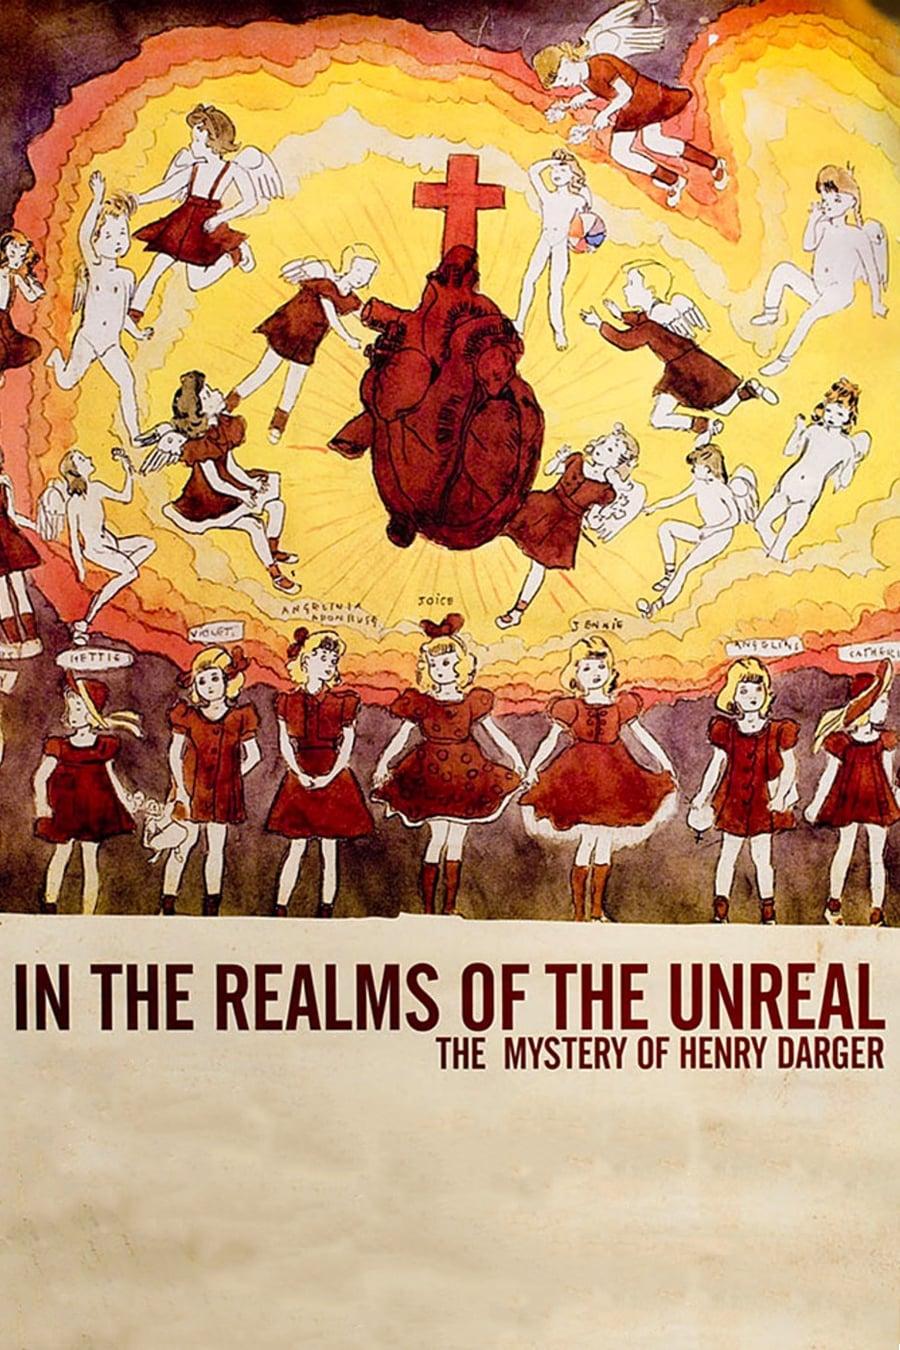 In the Realms of the Unreal poster